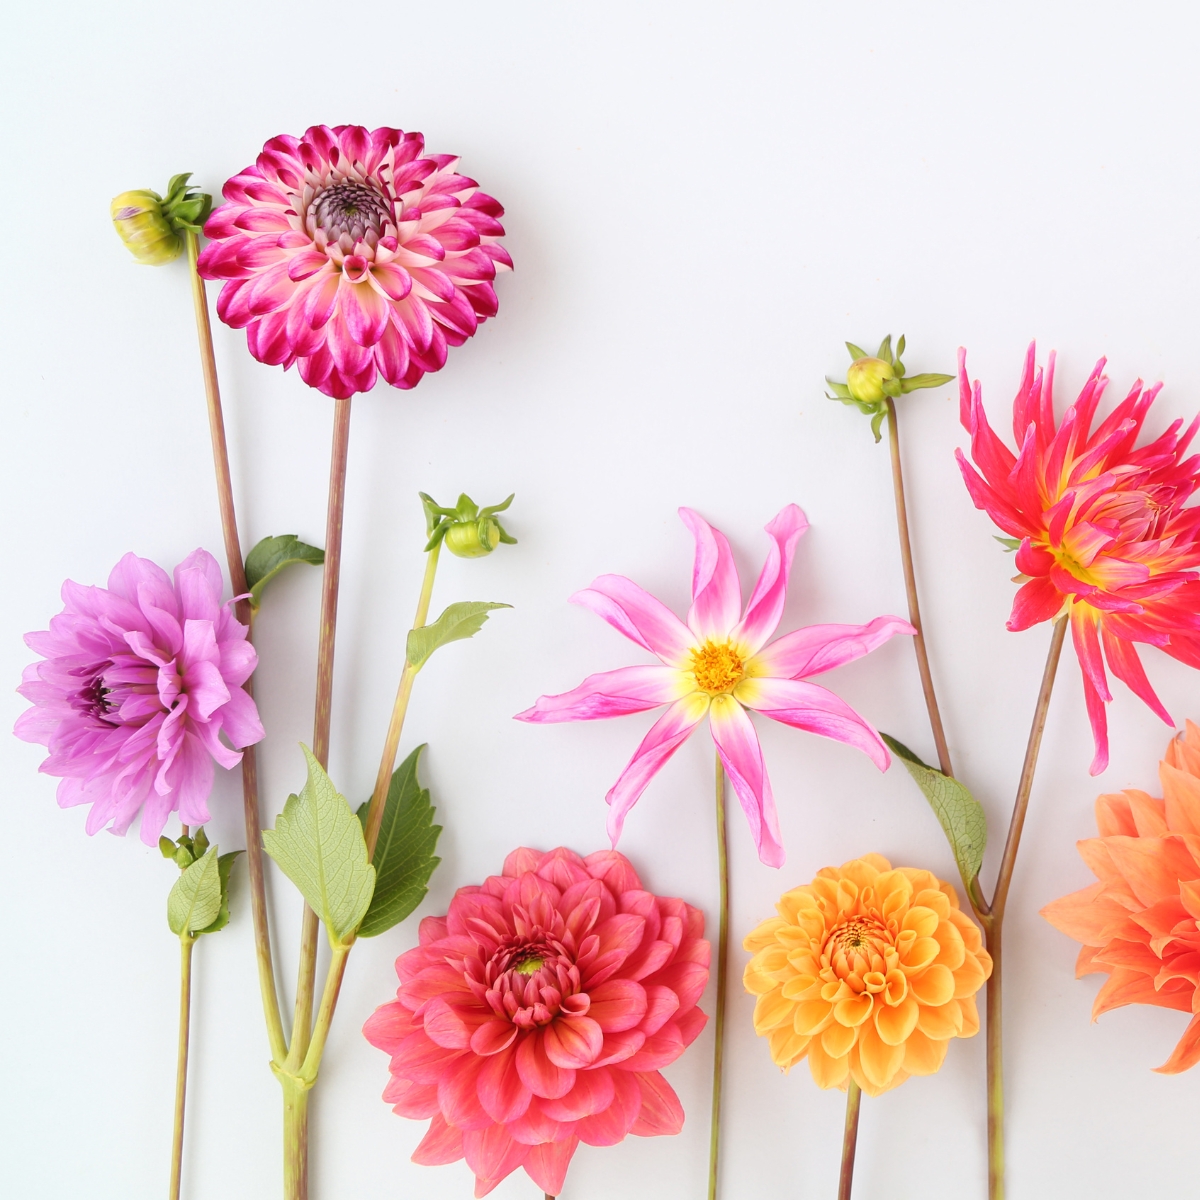 flat lay photo of dahlia blossoms of different colors and shapes